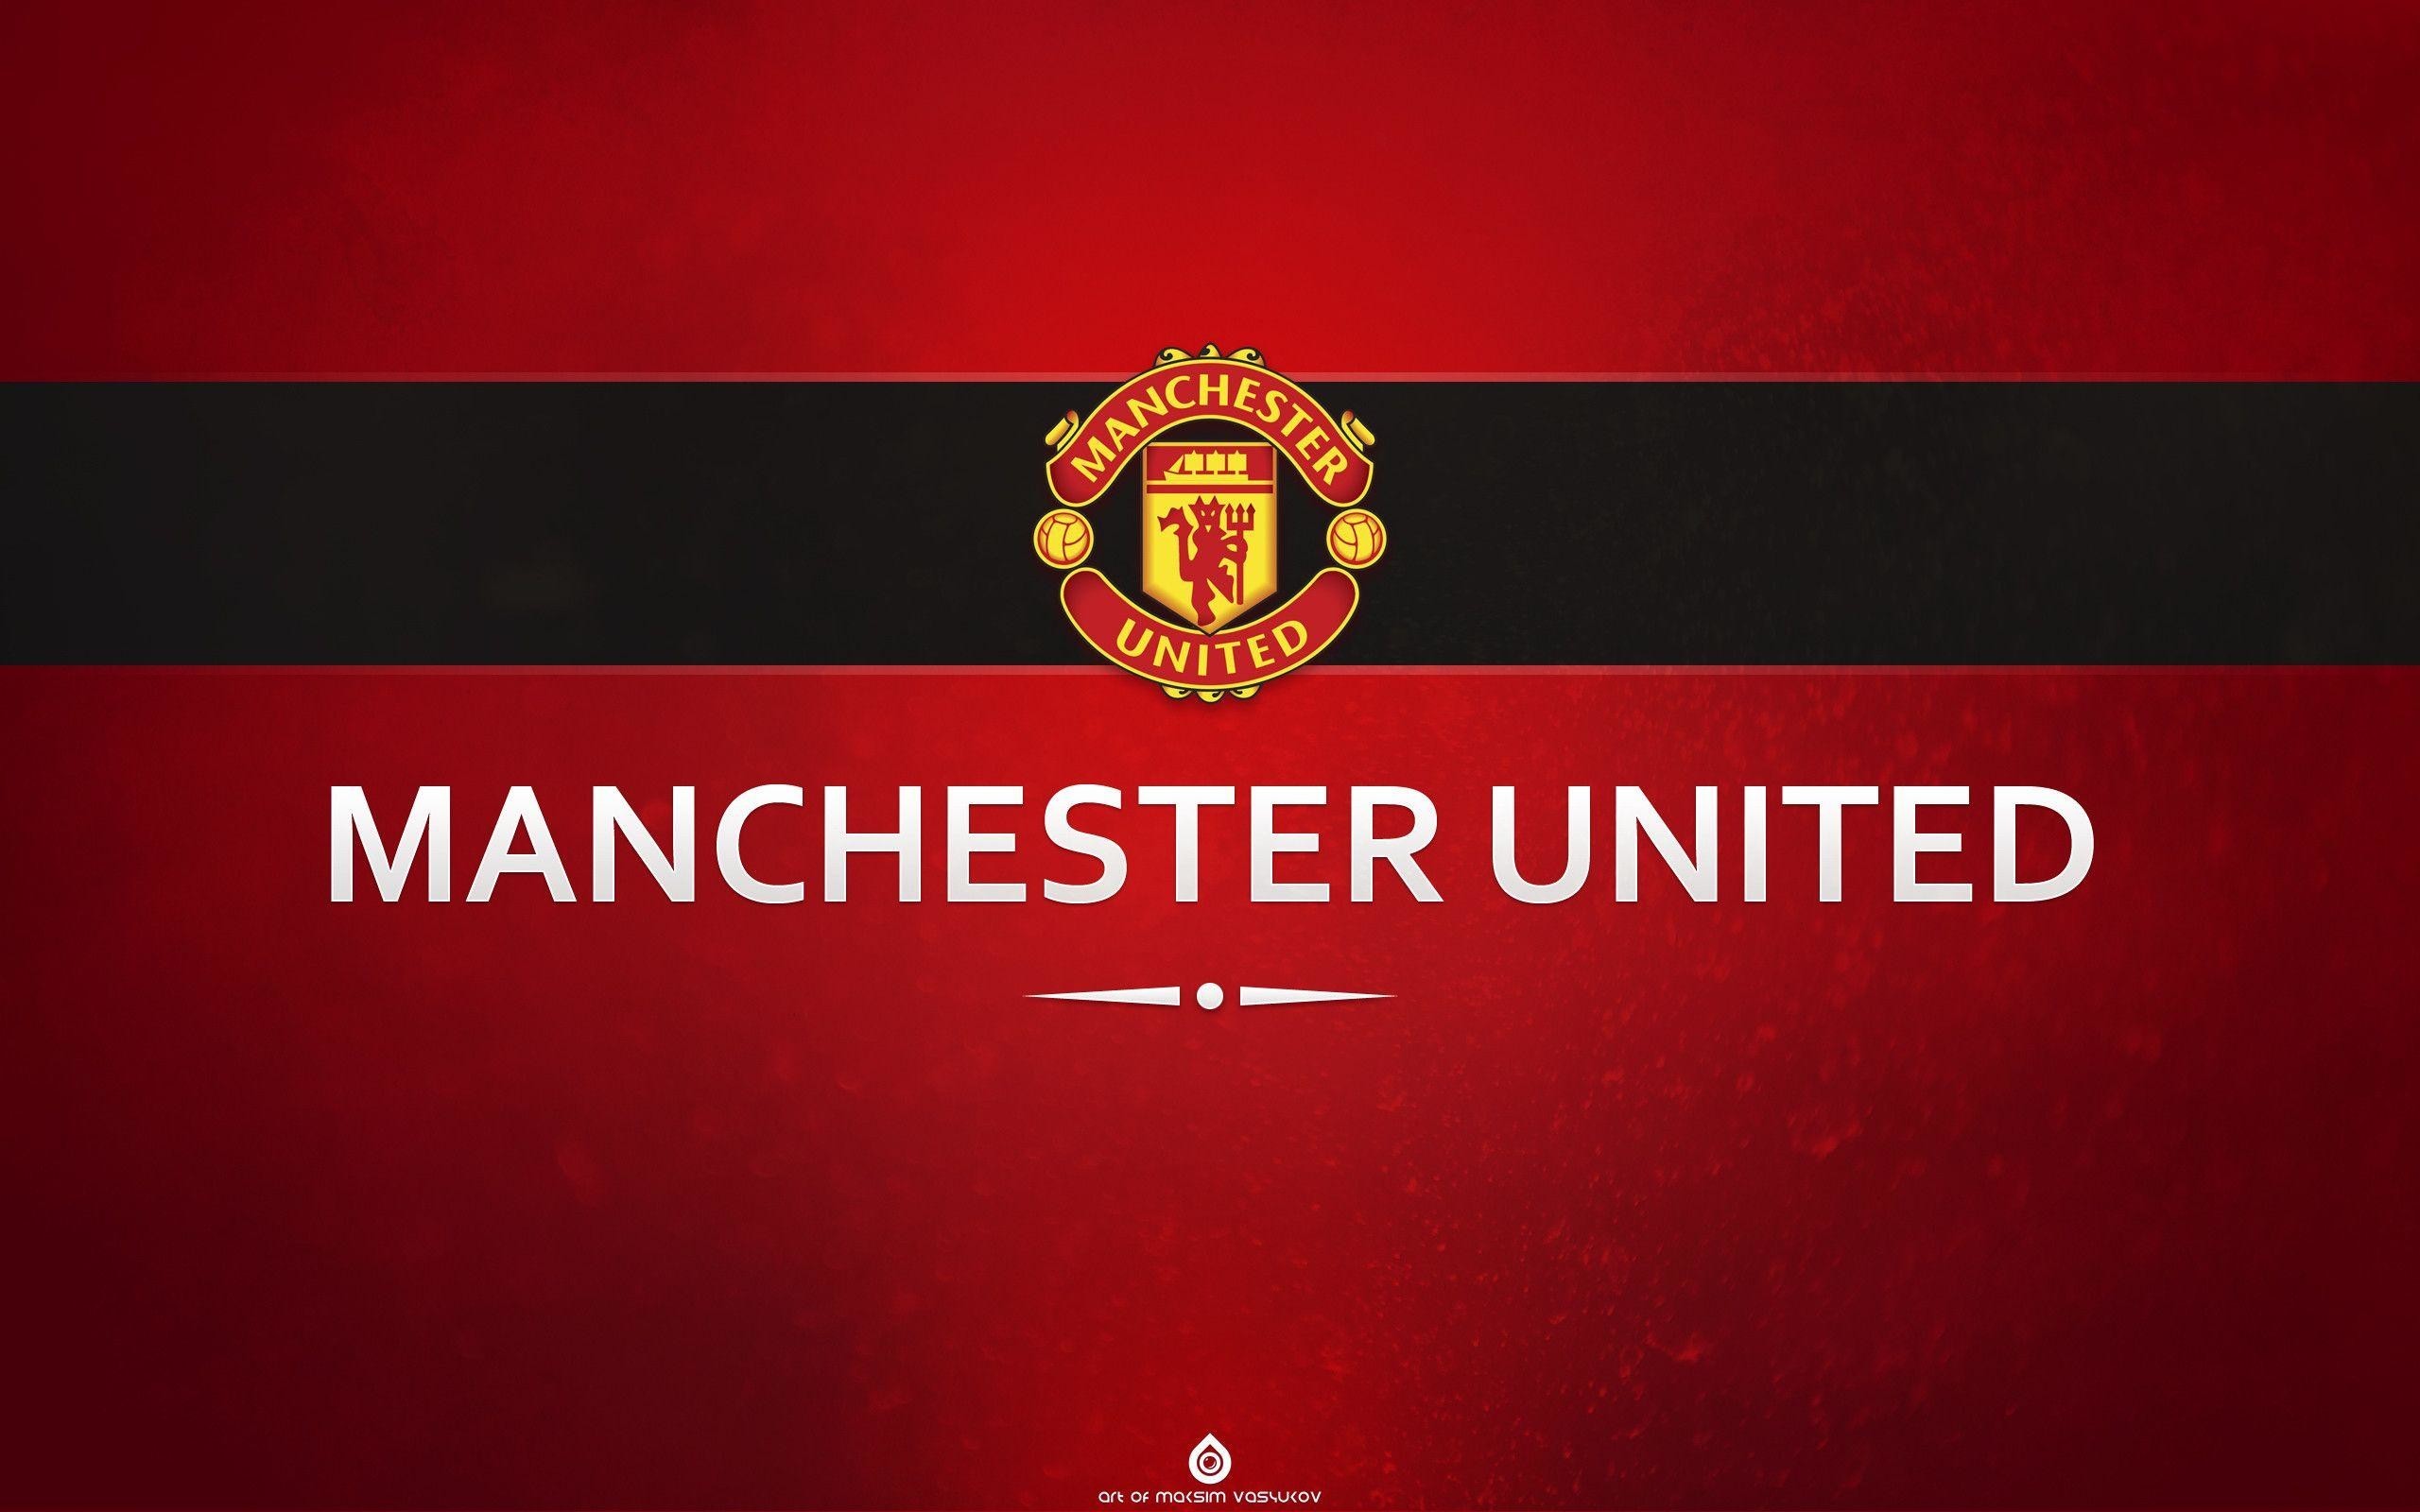 Manchester United Hd Wallpaper Manchester United Images New 2560x1600 2560x1600